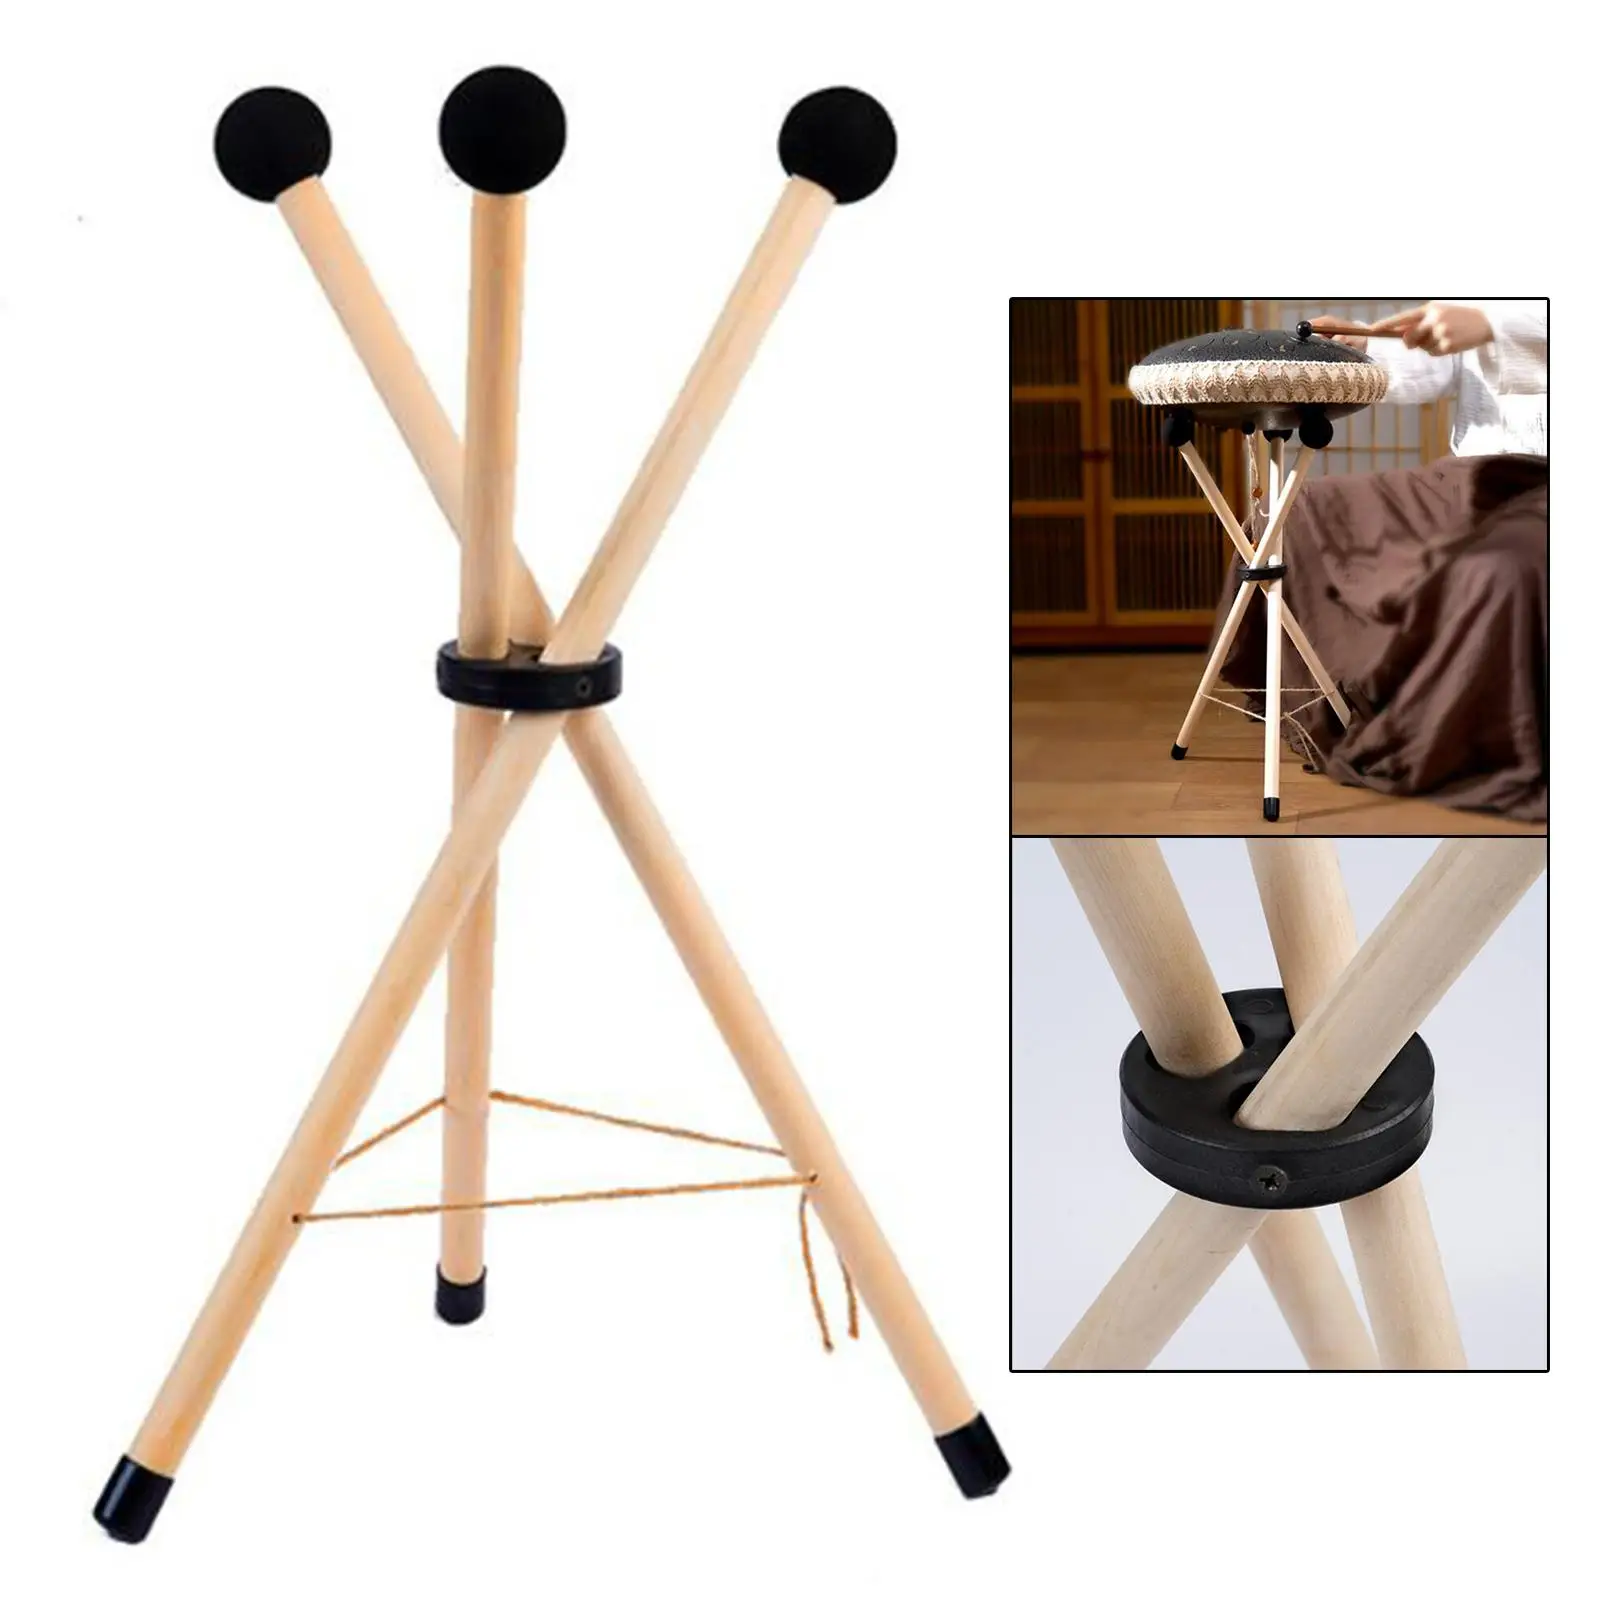 Drum Holder, Solid Wood Tripod Foldable Stable Stand, Tongue Drum Tripod Stand Holder Percussion Drum Accessory